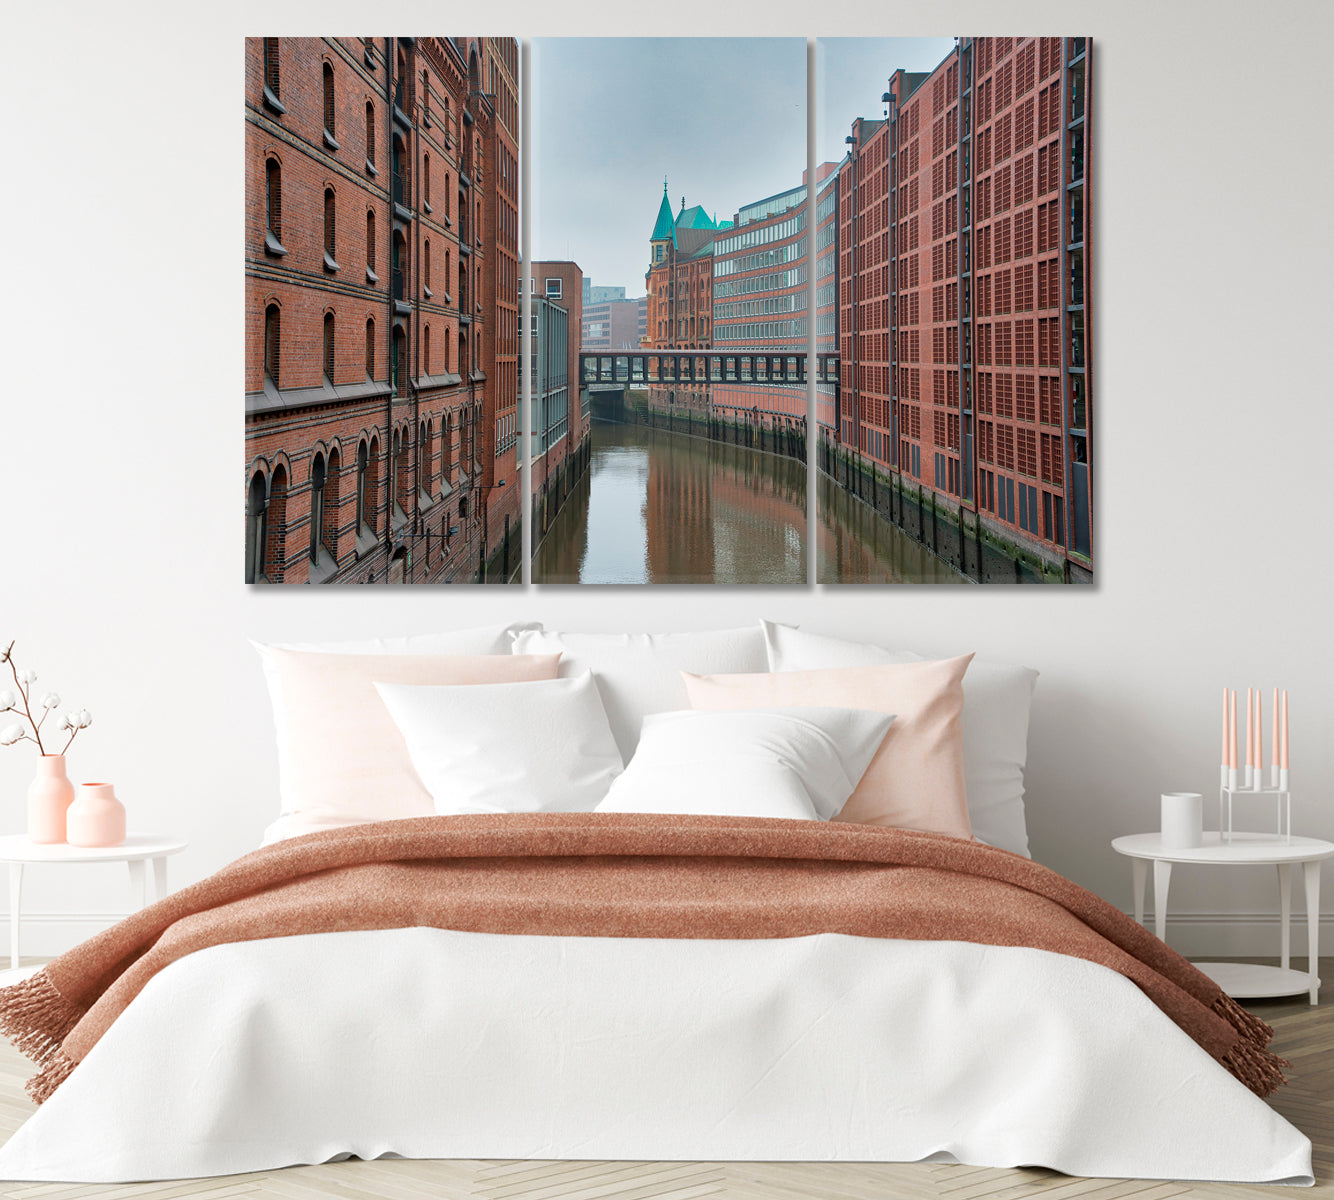 The Canals of Hamburg on the Elbe River Canvas Print-Canvas Print-CetArt-1 Panel-24x16 inches-CetArt